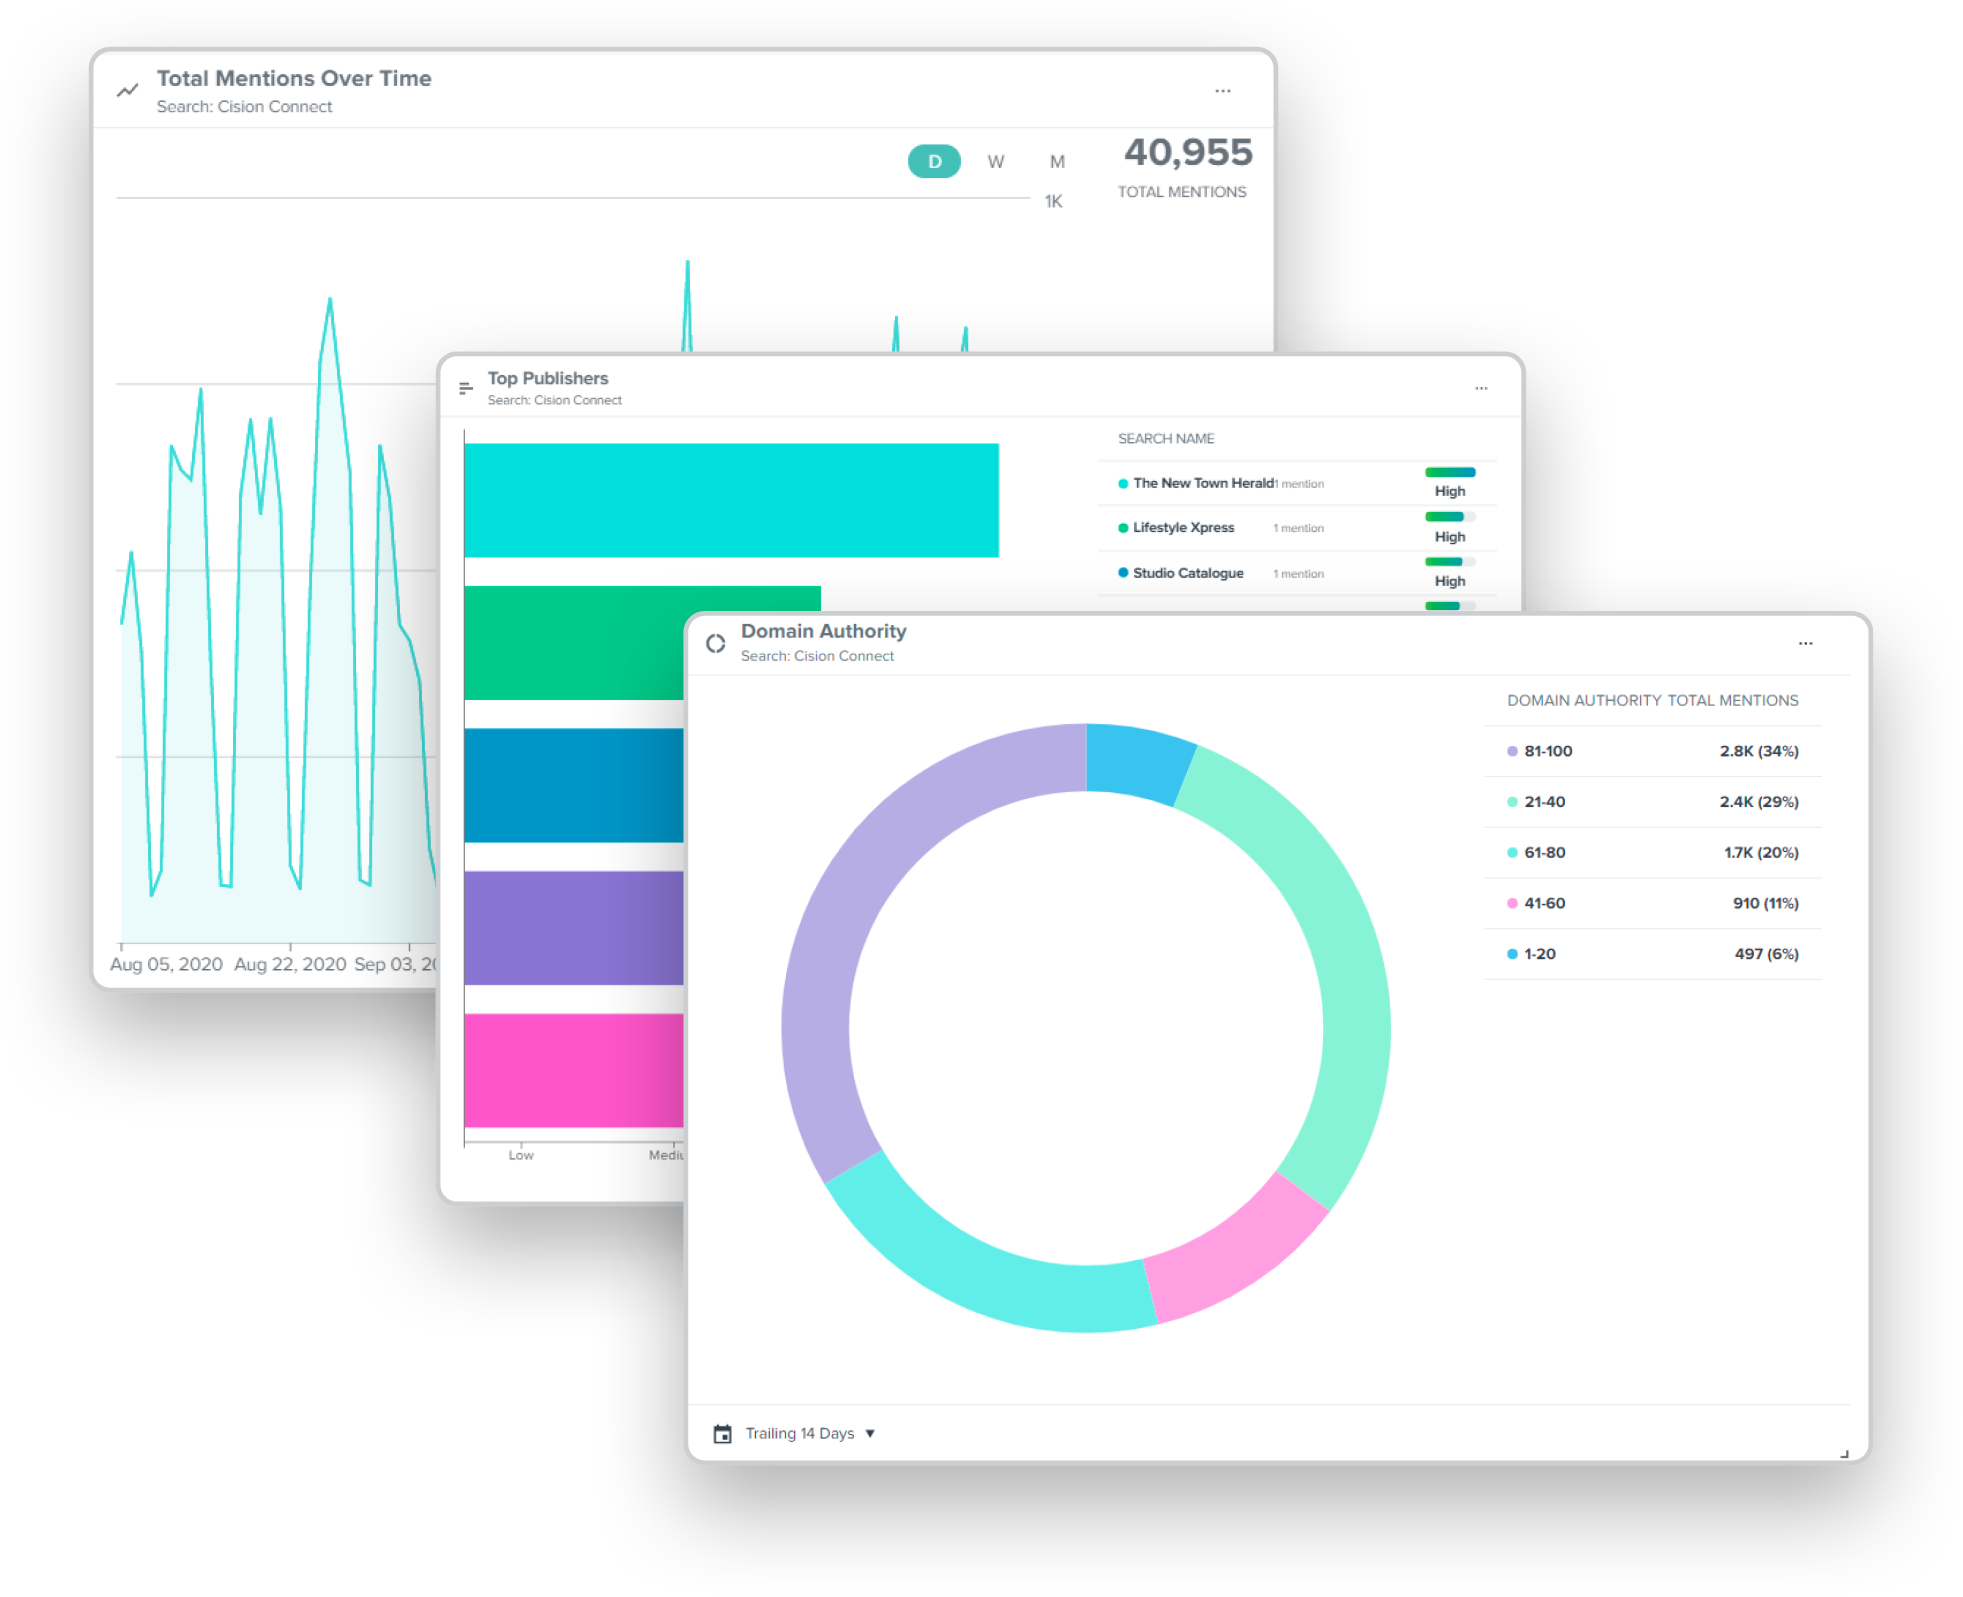 One click creates interactive reports from dashboards in Cision's Next Generation Communications Cloud